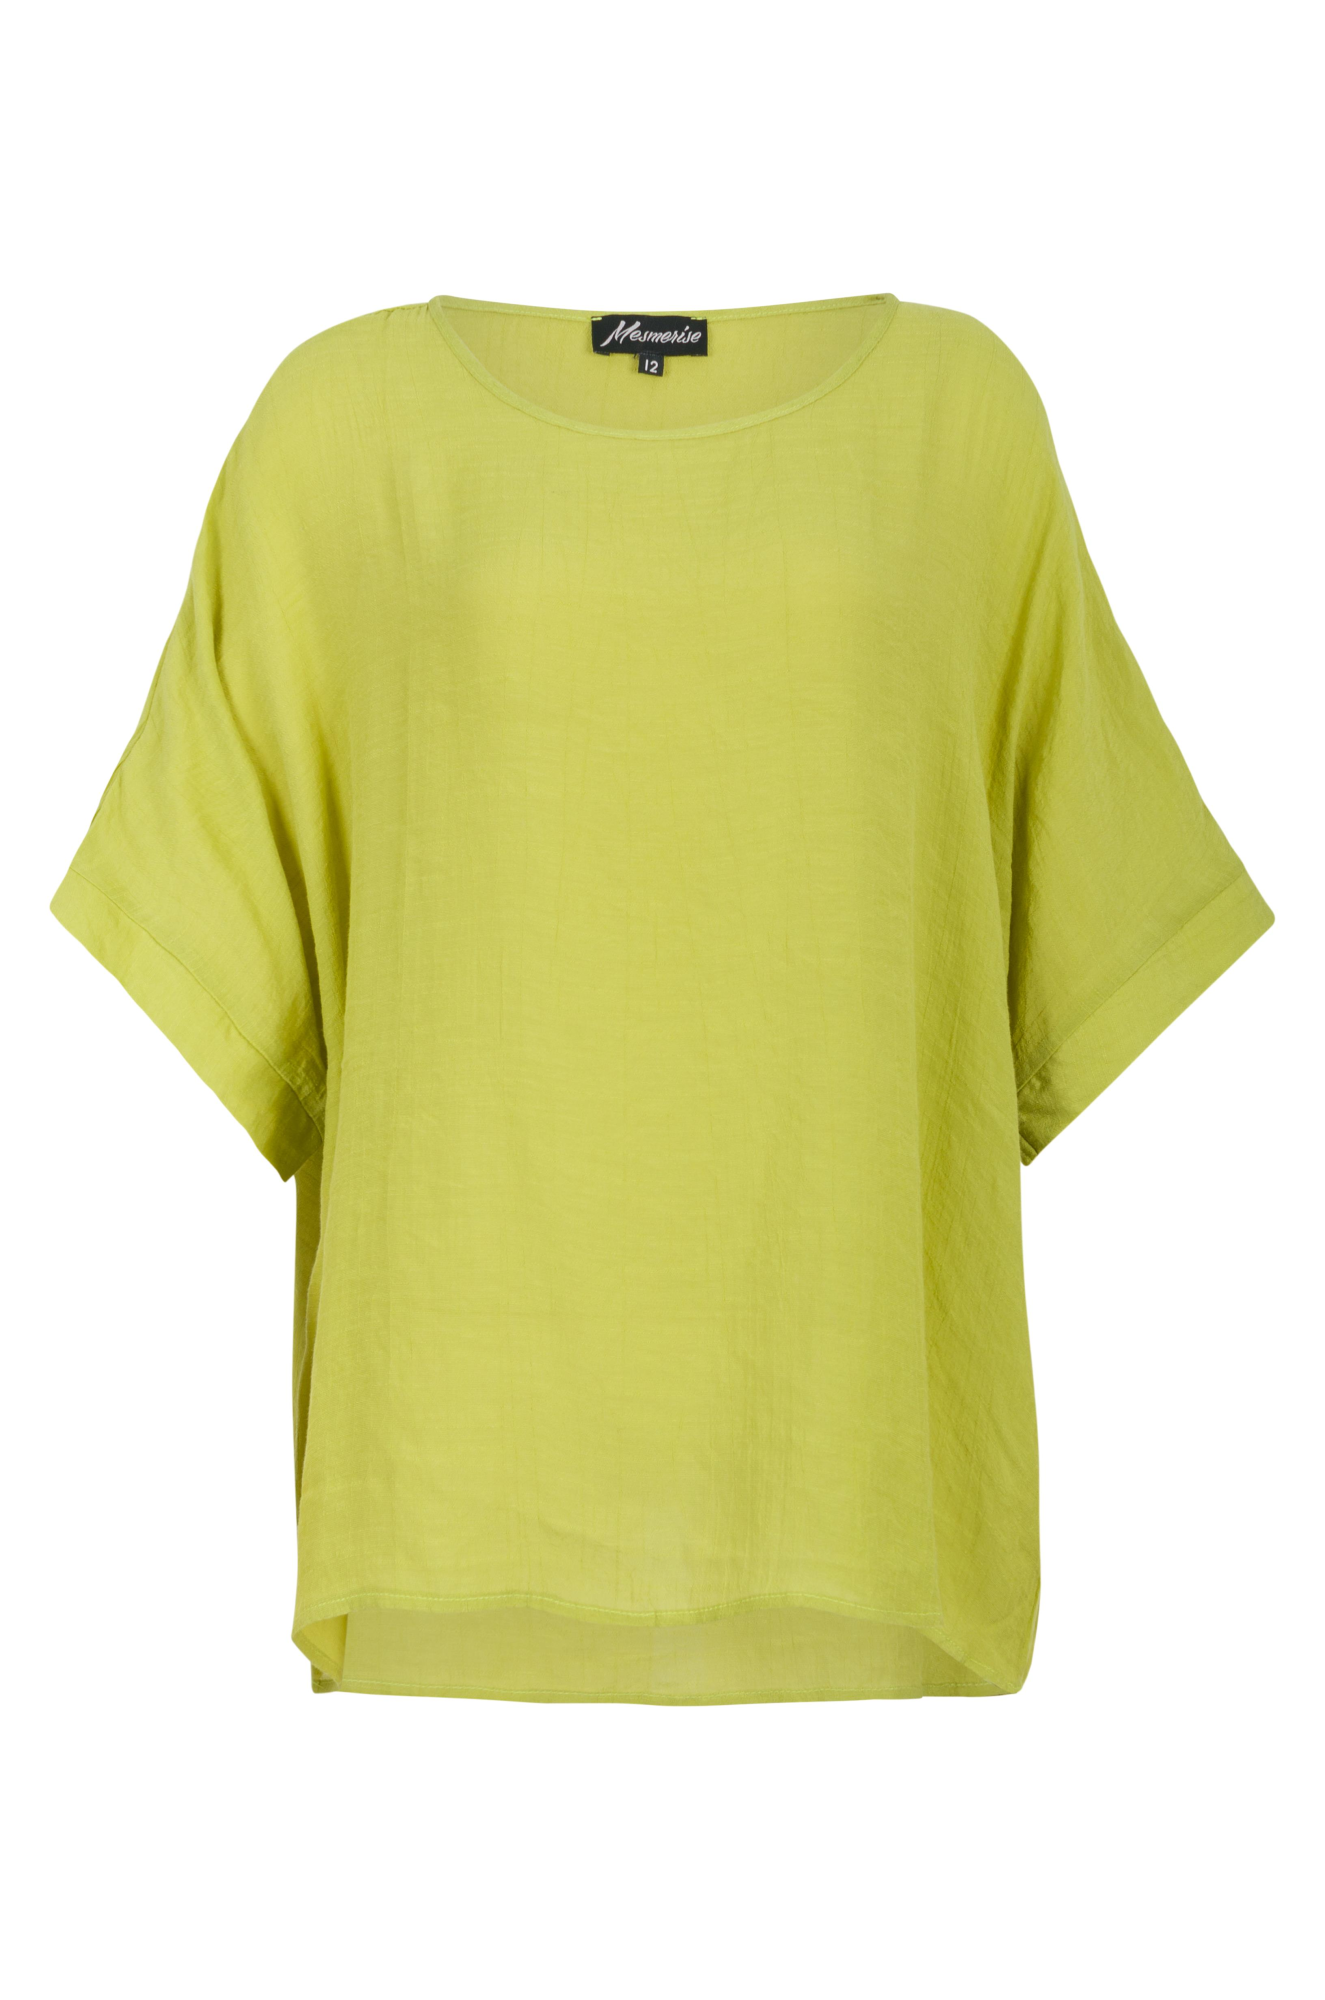 Relaxed fit Soft Crosshatch Top | CHARTREUSE | 8821YY – Ballentynes ...